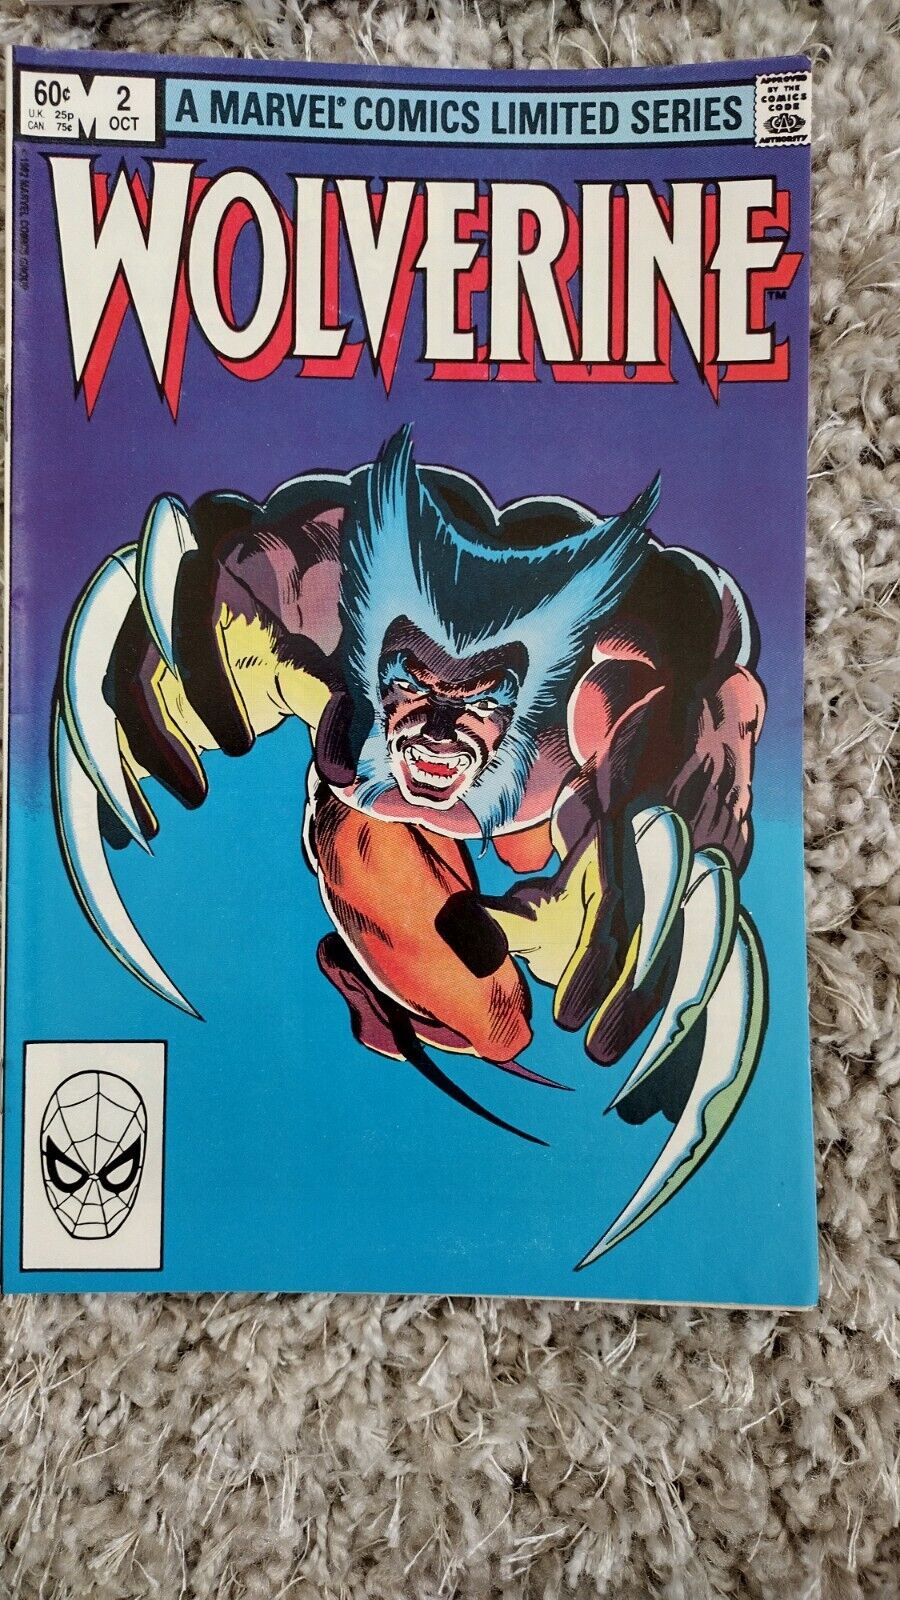 Wolverine #2 (1982) Limited Series | Non graded but excellent shape